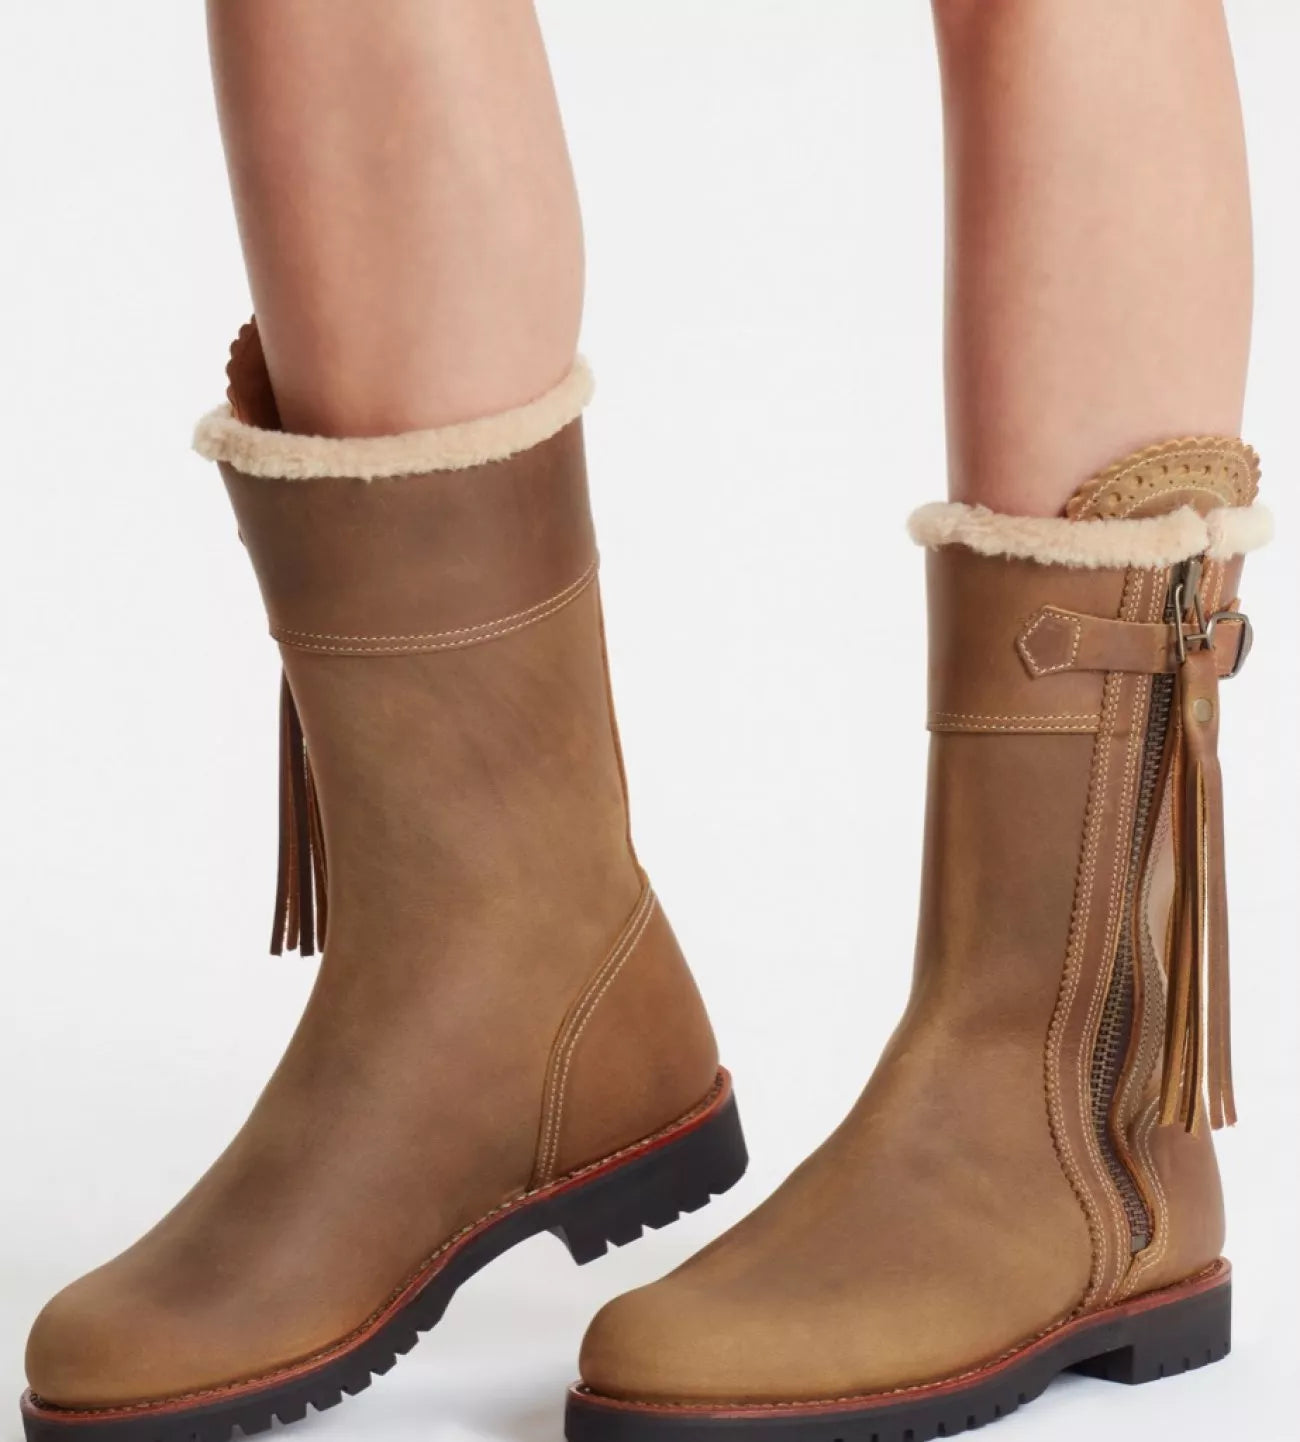 Penelope Chilvers Midcalf Tassel Lined Boot - Biscuit